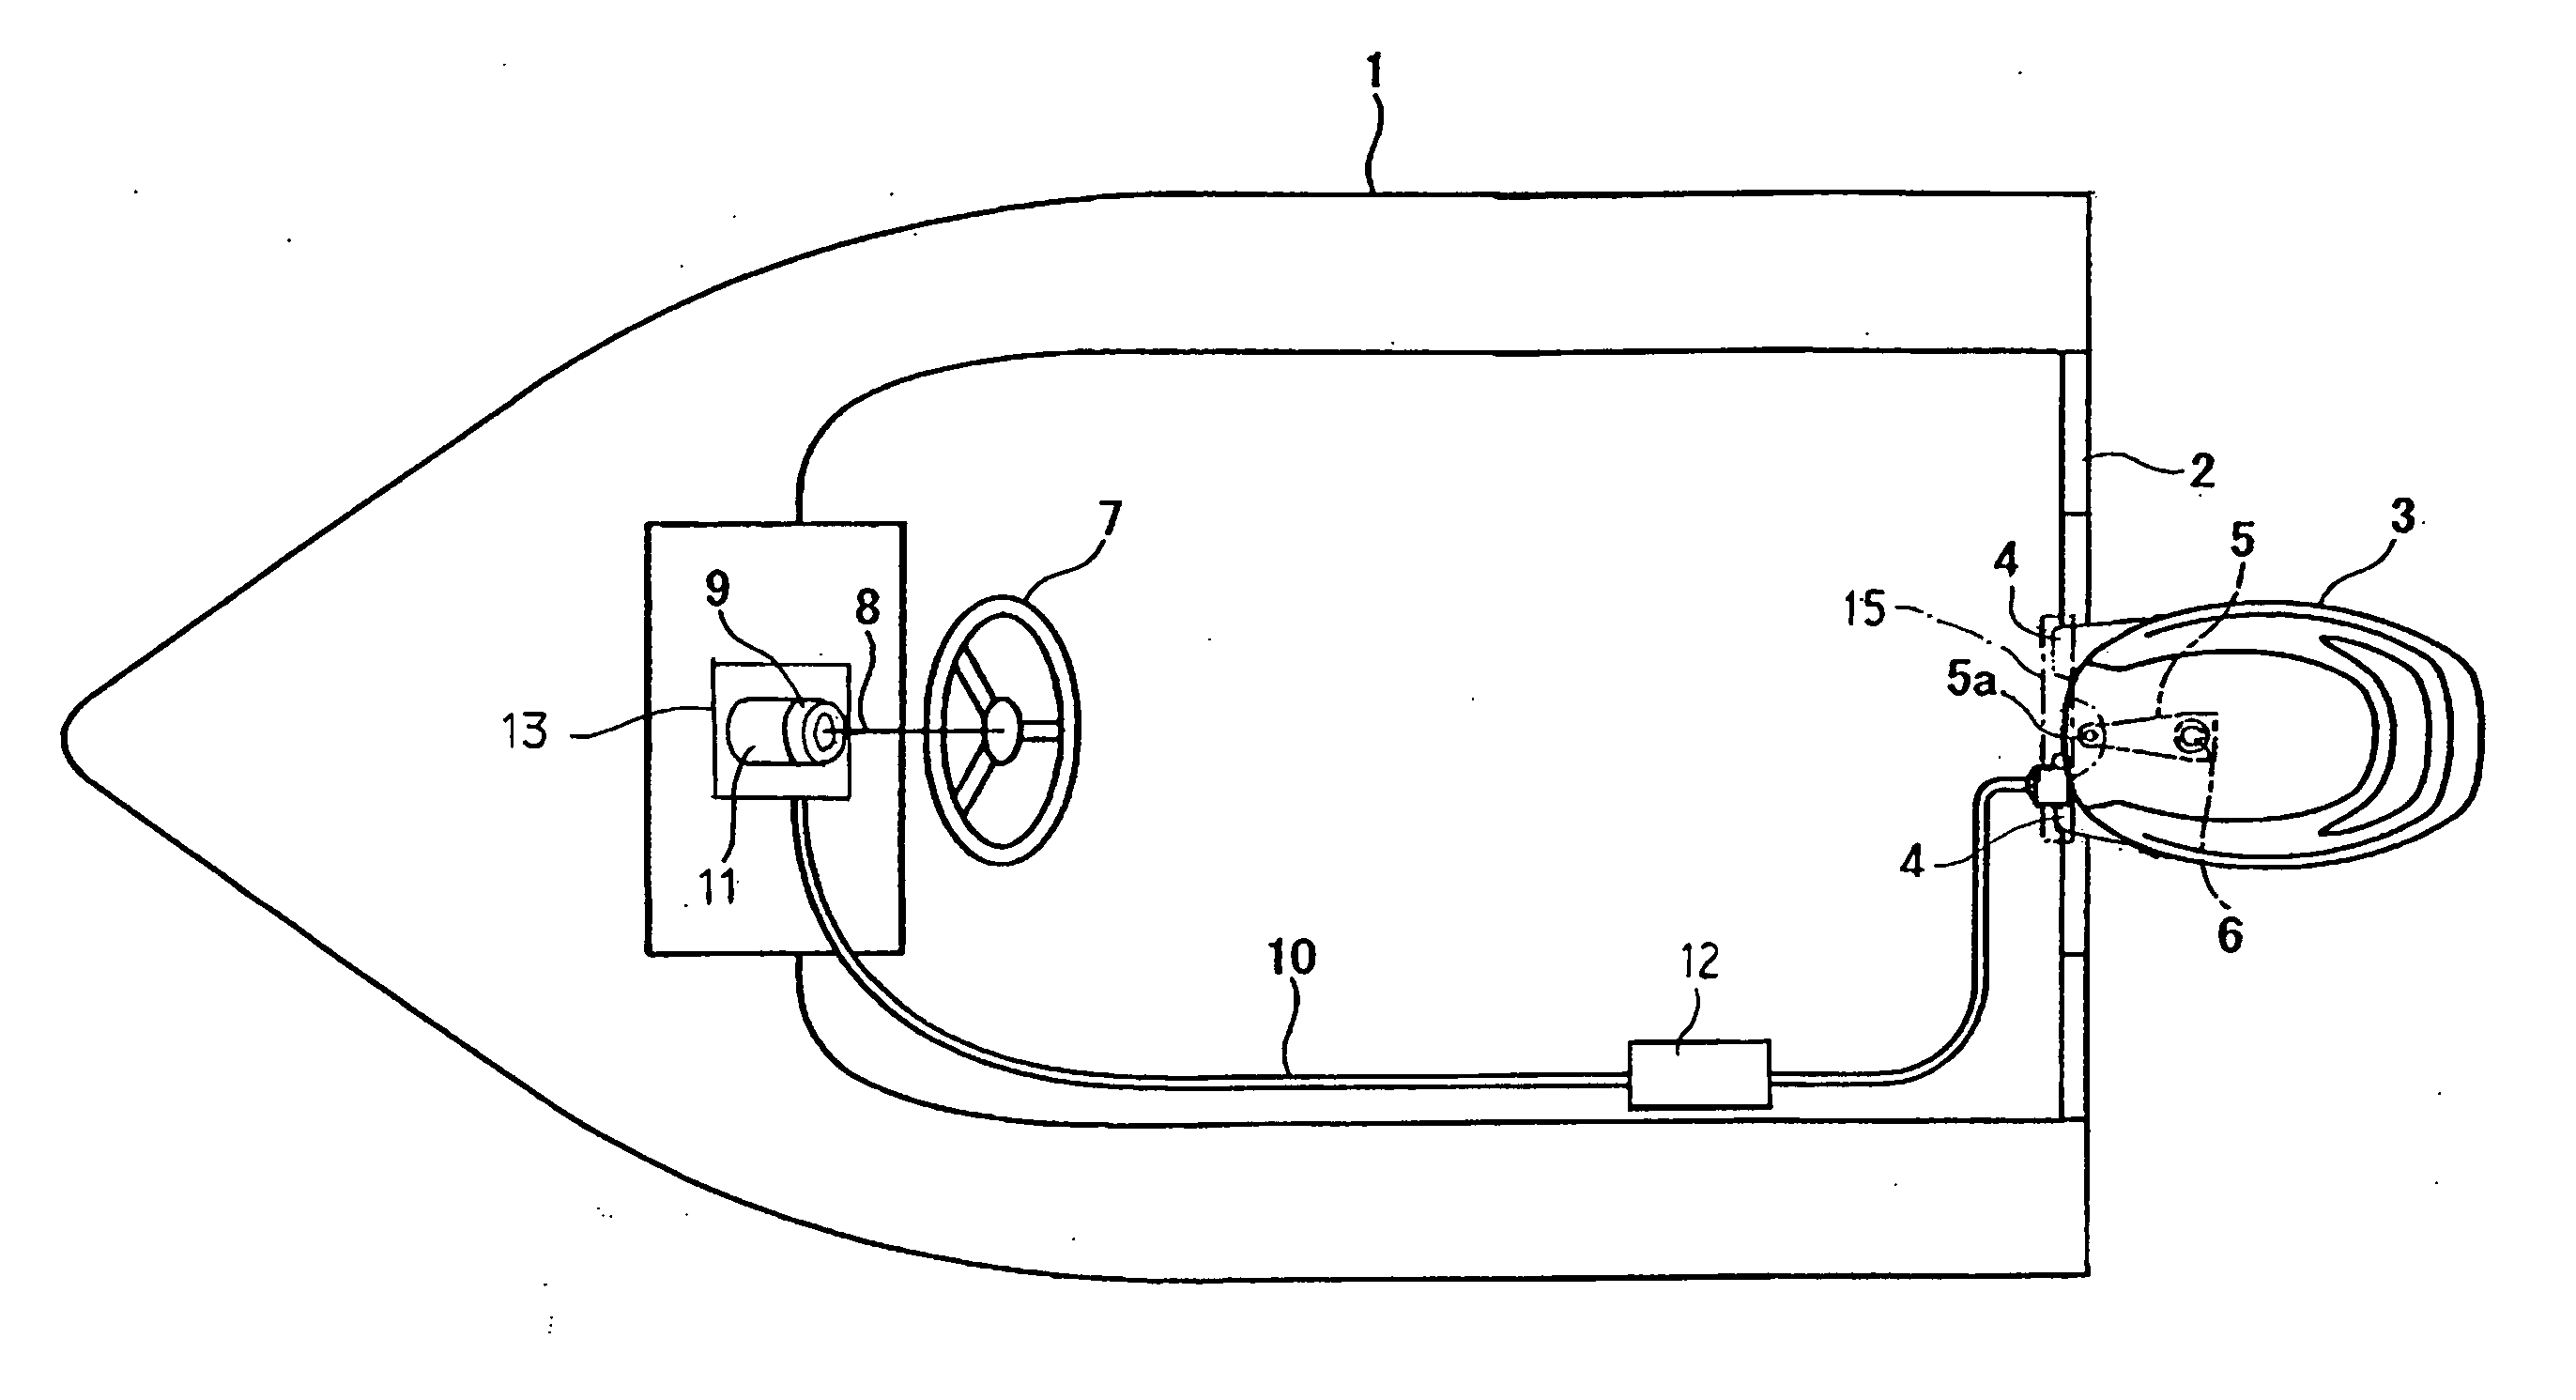 Electric steering apparatus for watercraft